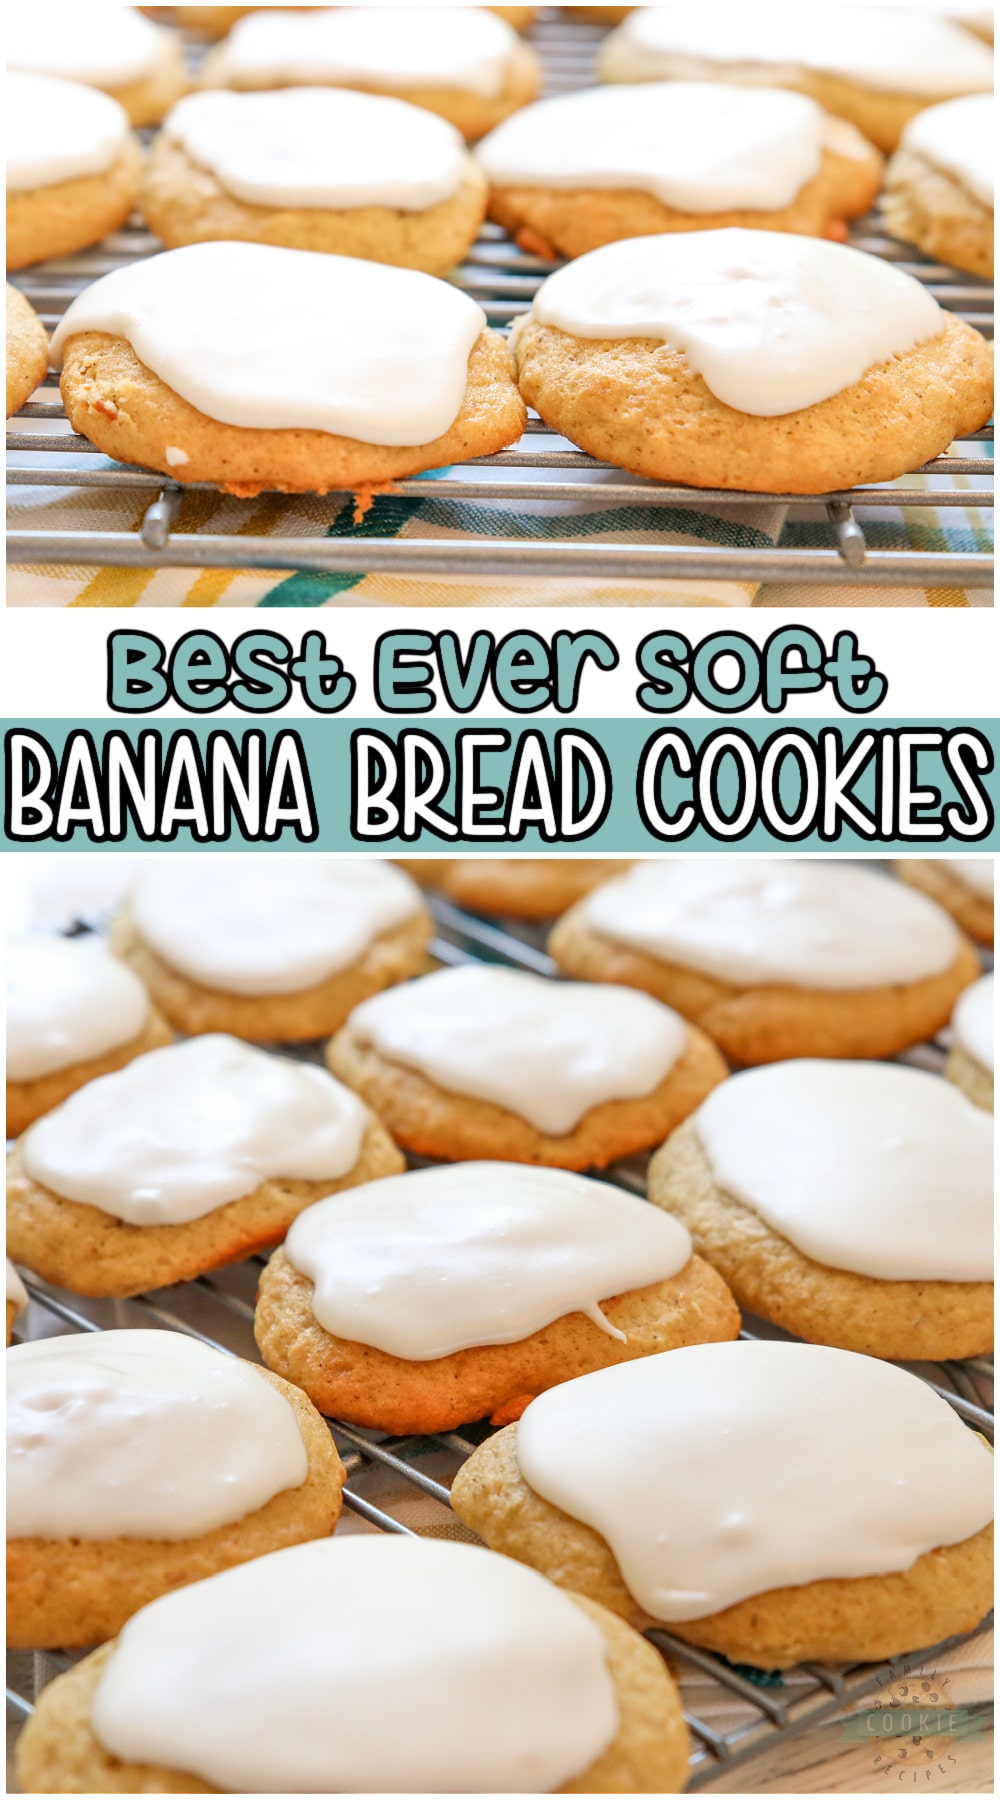 Banana Bread Cookies are soft, sweet cookies made with ripe bananas and topped with a simple vanilla glaze. They're everything you love about Banana Bread, but in cookie form! #cookies #banana #bananabread #baking #easyrecipe from FAMILY COOKIE RECIPES via @buttergirls